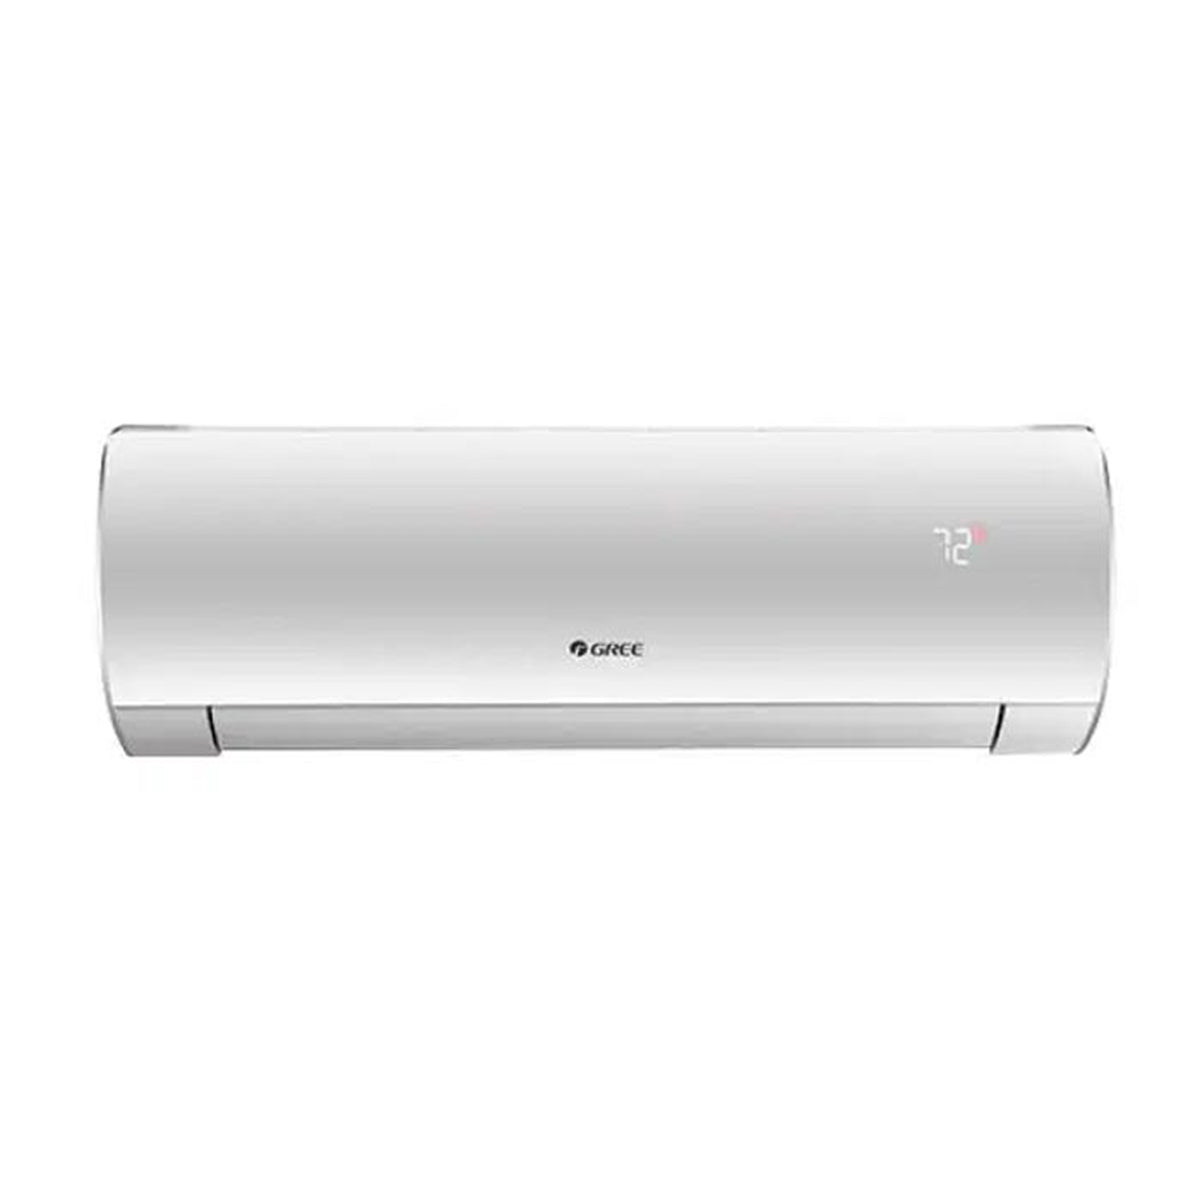 Gree Air Conditioner 1.5 Ton - GS-18FITH6C/6S/6G Inverter 65% Savings